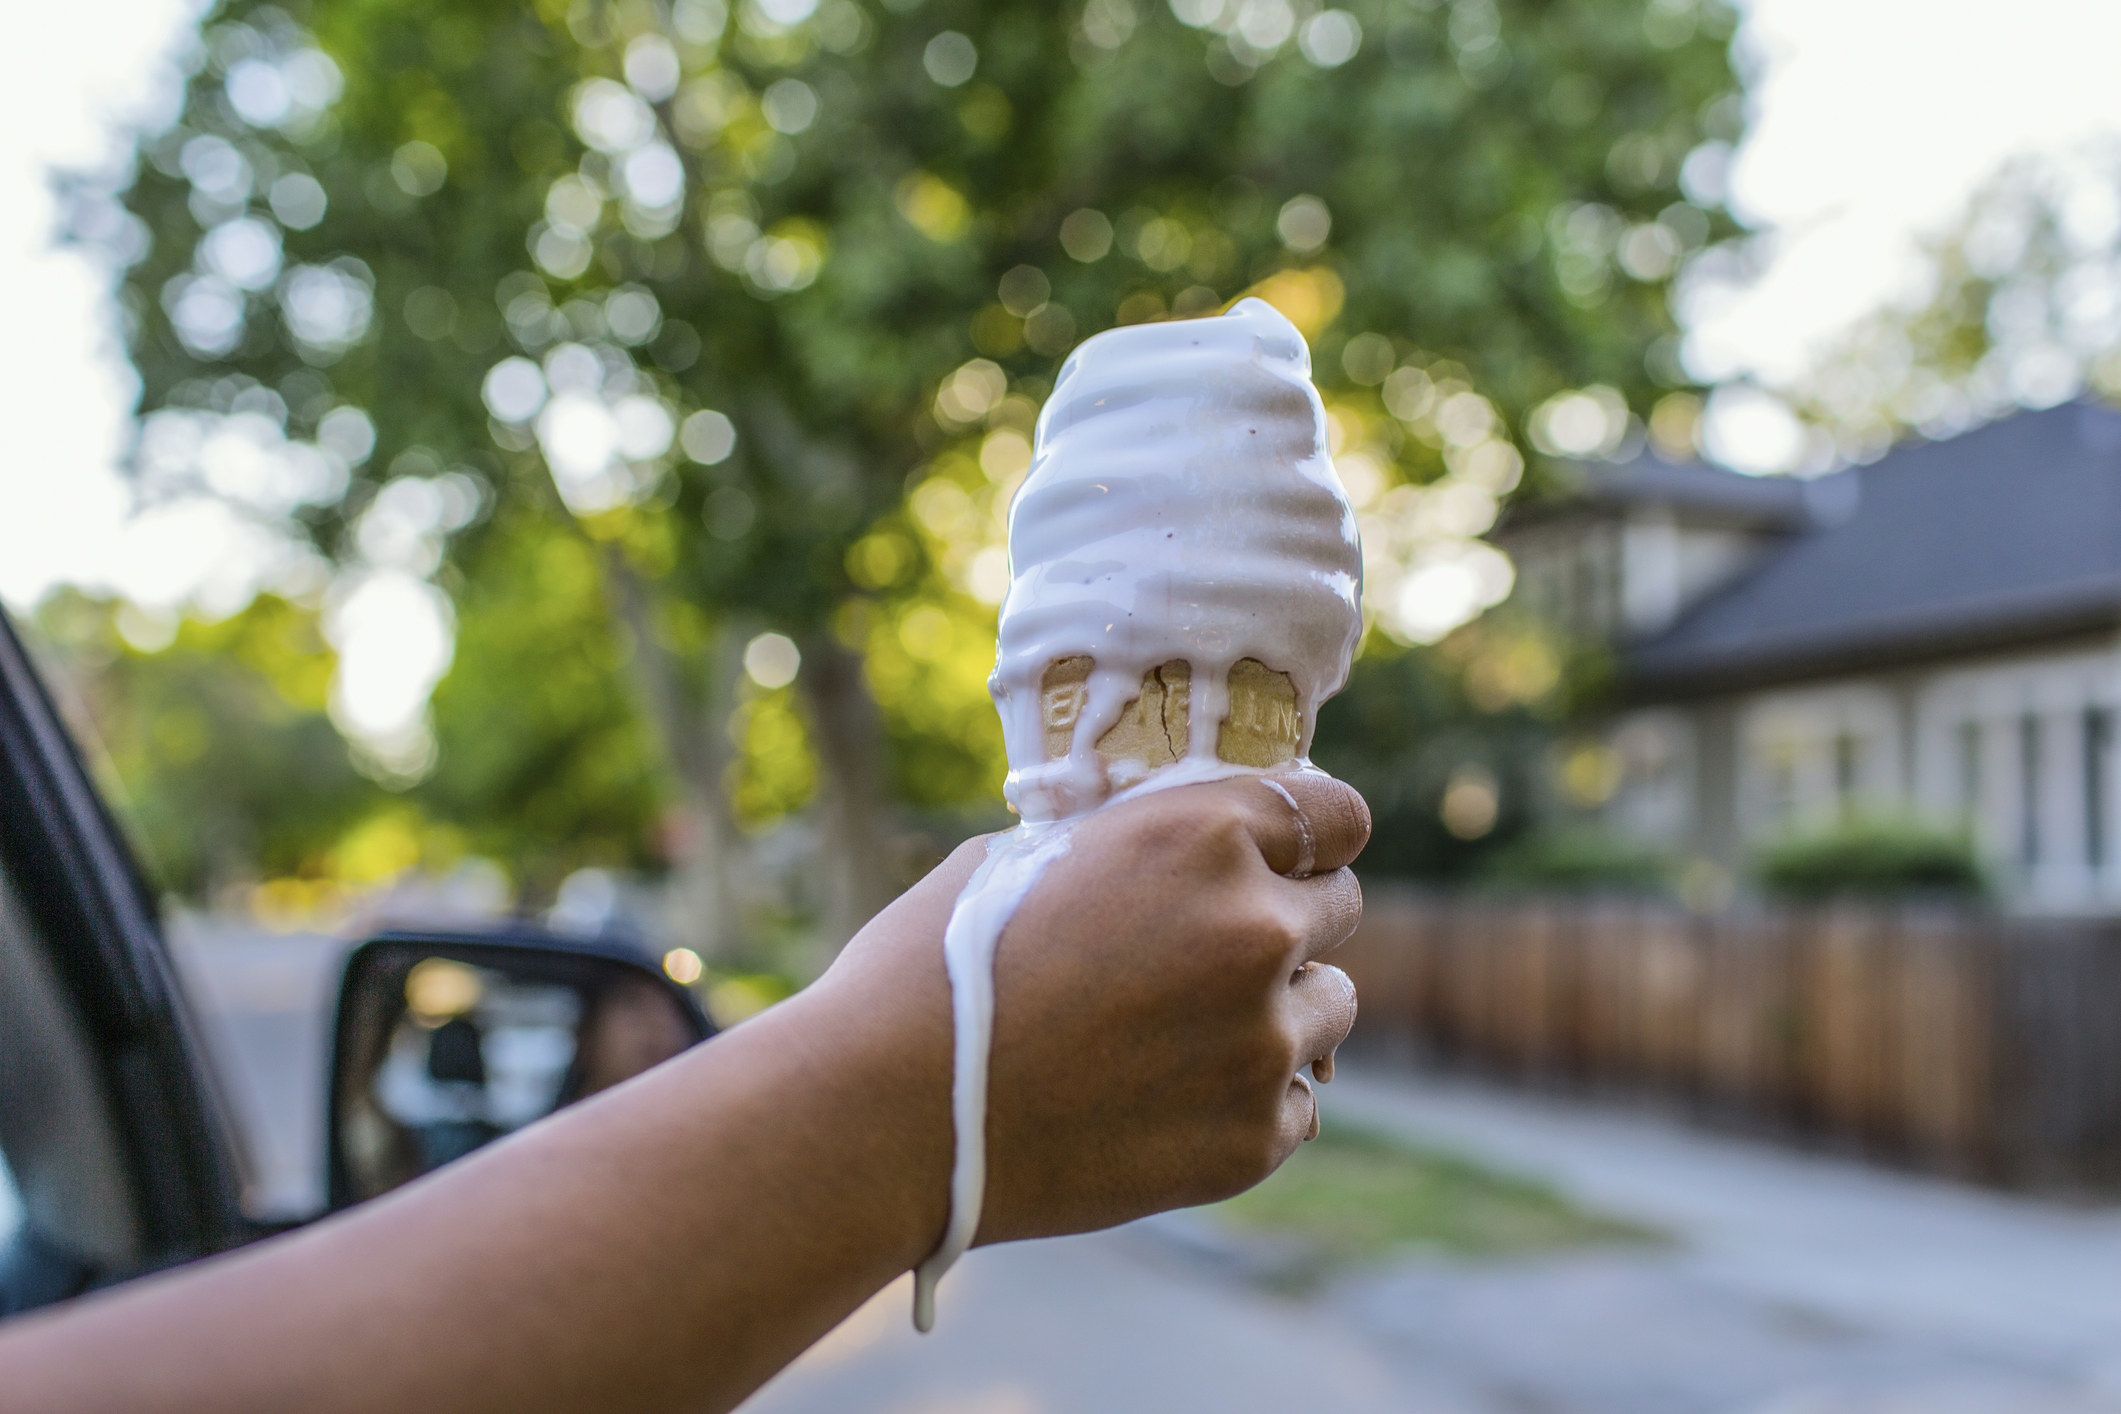 Someone holding a melting ice cream cone.